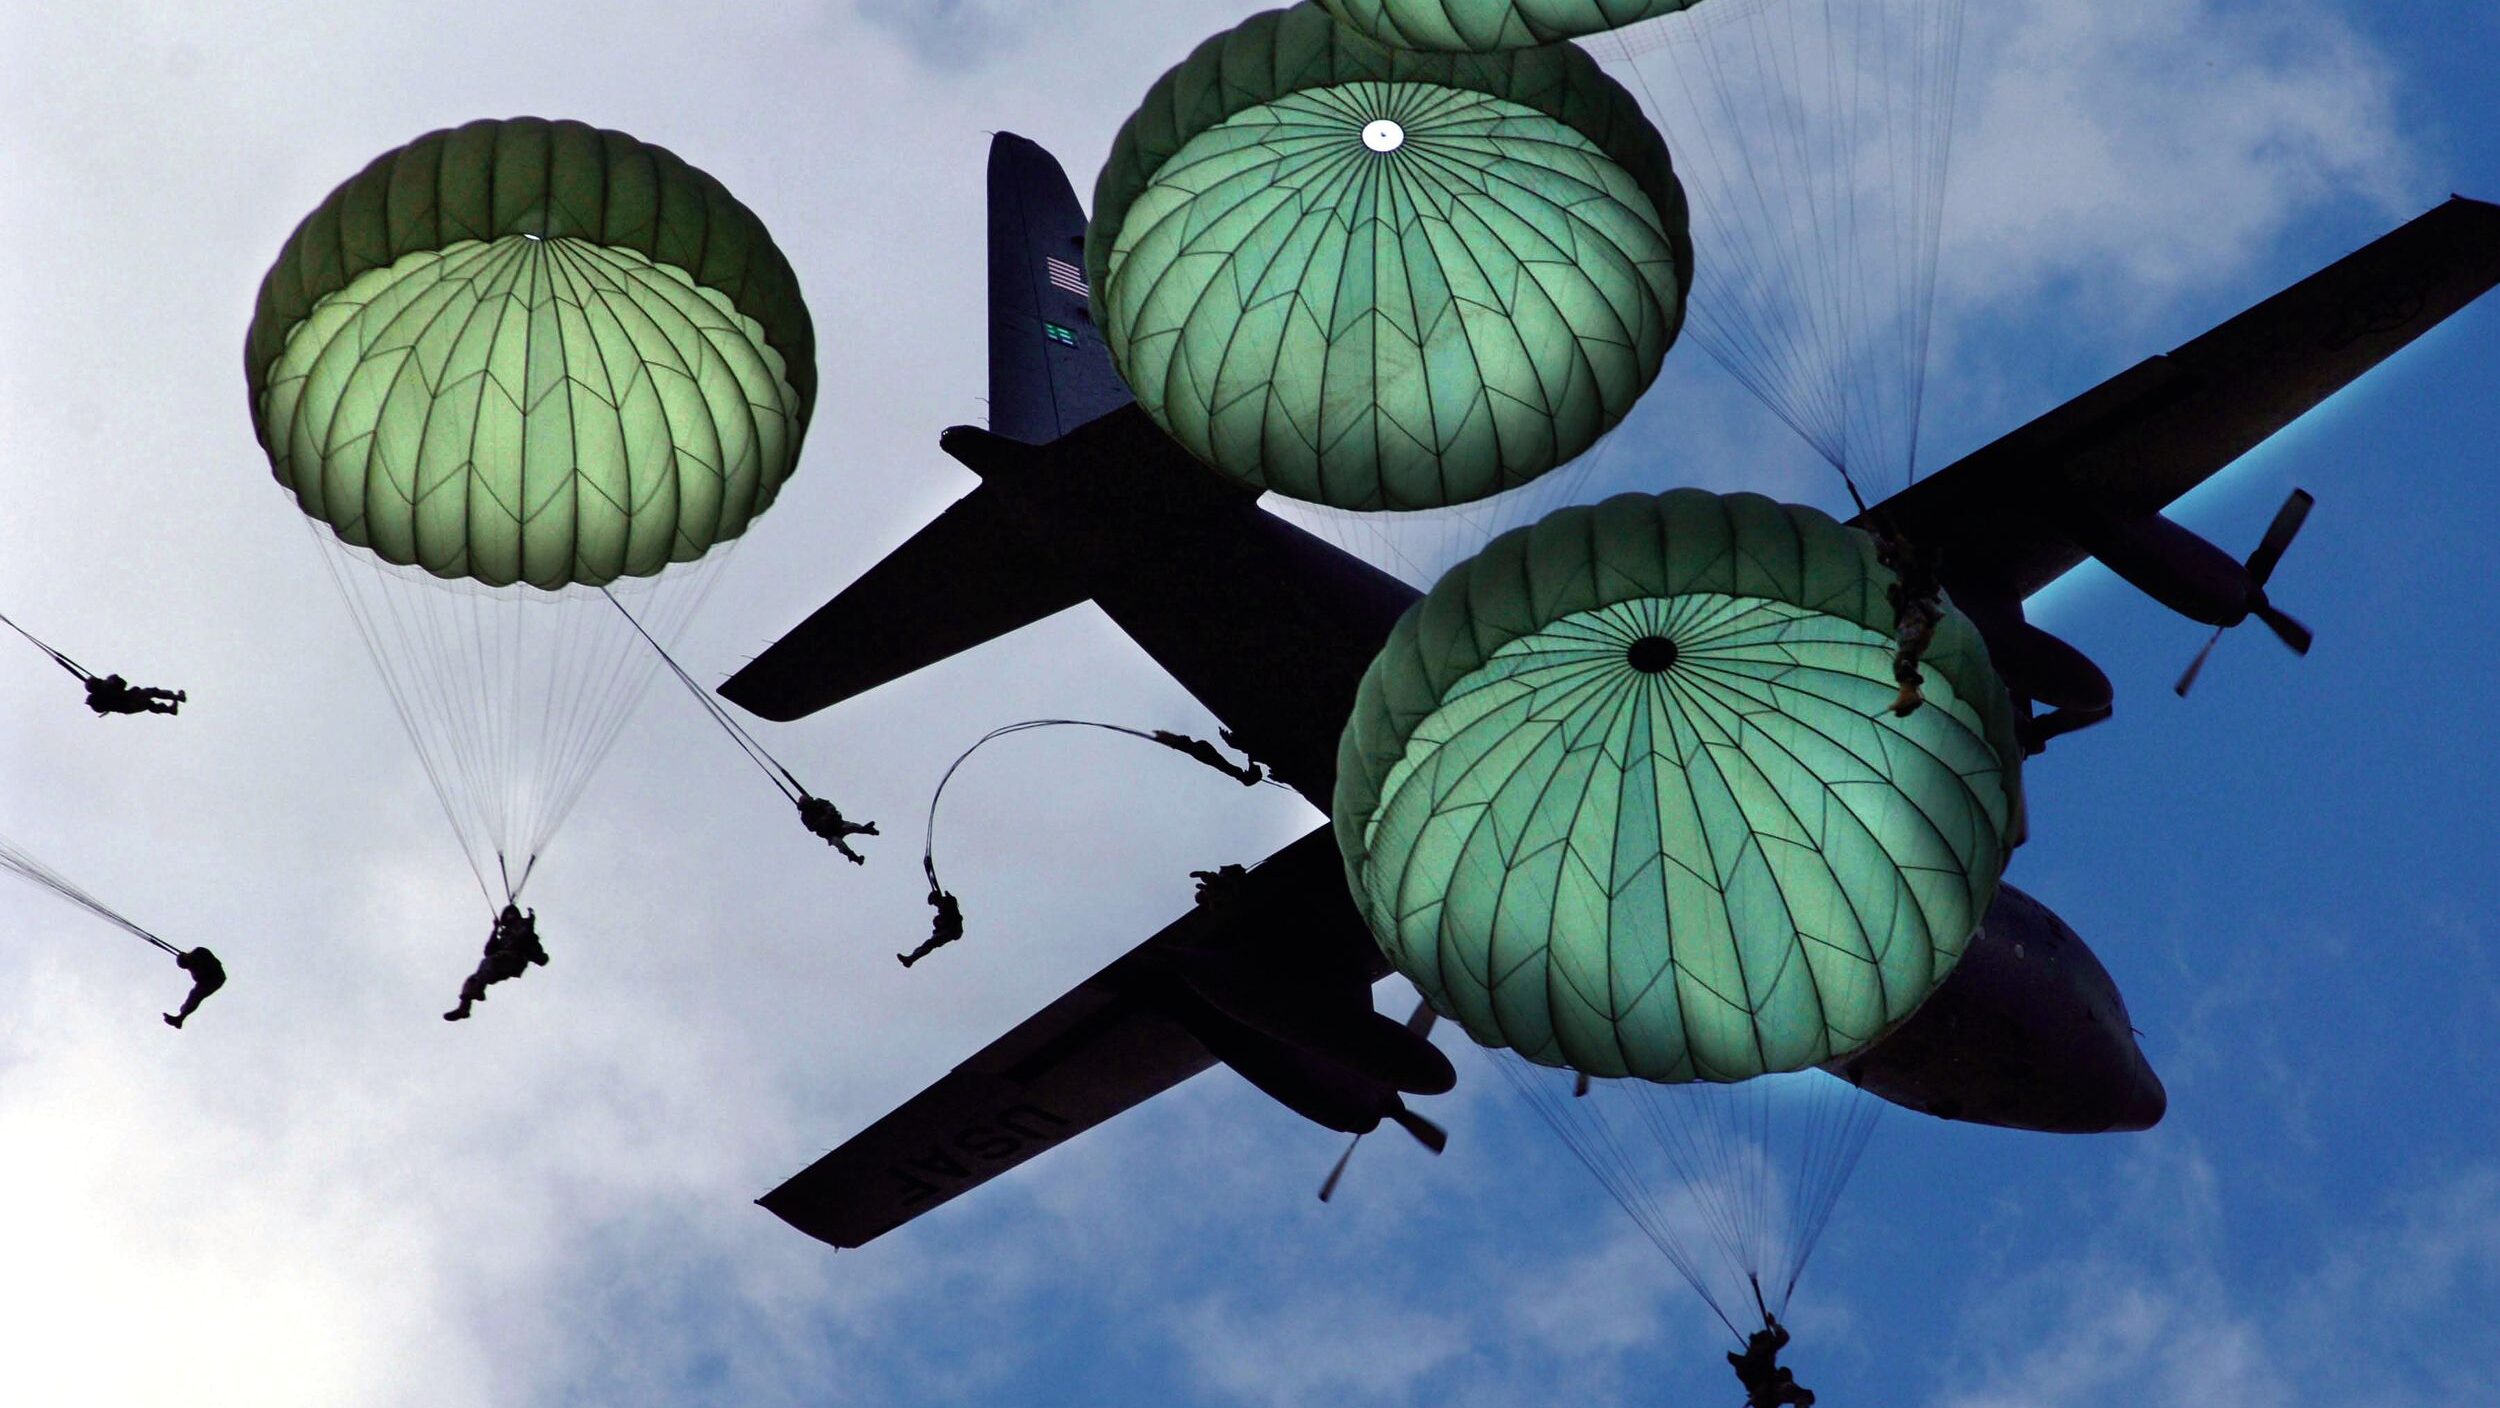 Paratroopers of the U.S. 82nd Airborne Division perform a mass jump during the 2006 Joint Service Open House at Joint Base Andrews in Prince George's County, Maryland. The 82nd was the U.S. Army's first airborne division, converted from an infantry division prior to World War II.